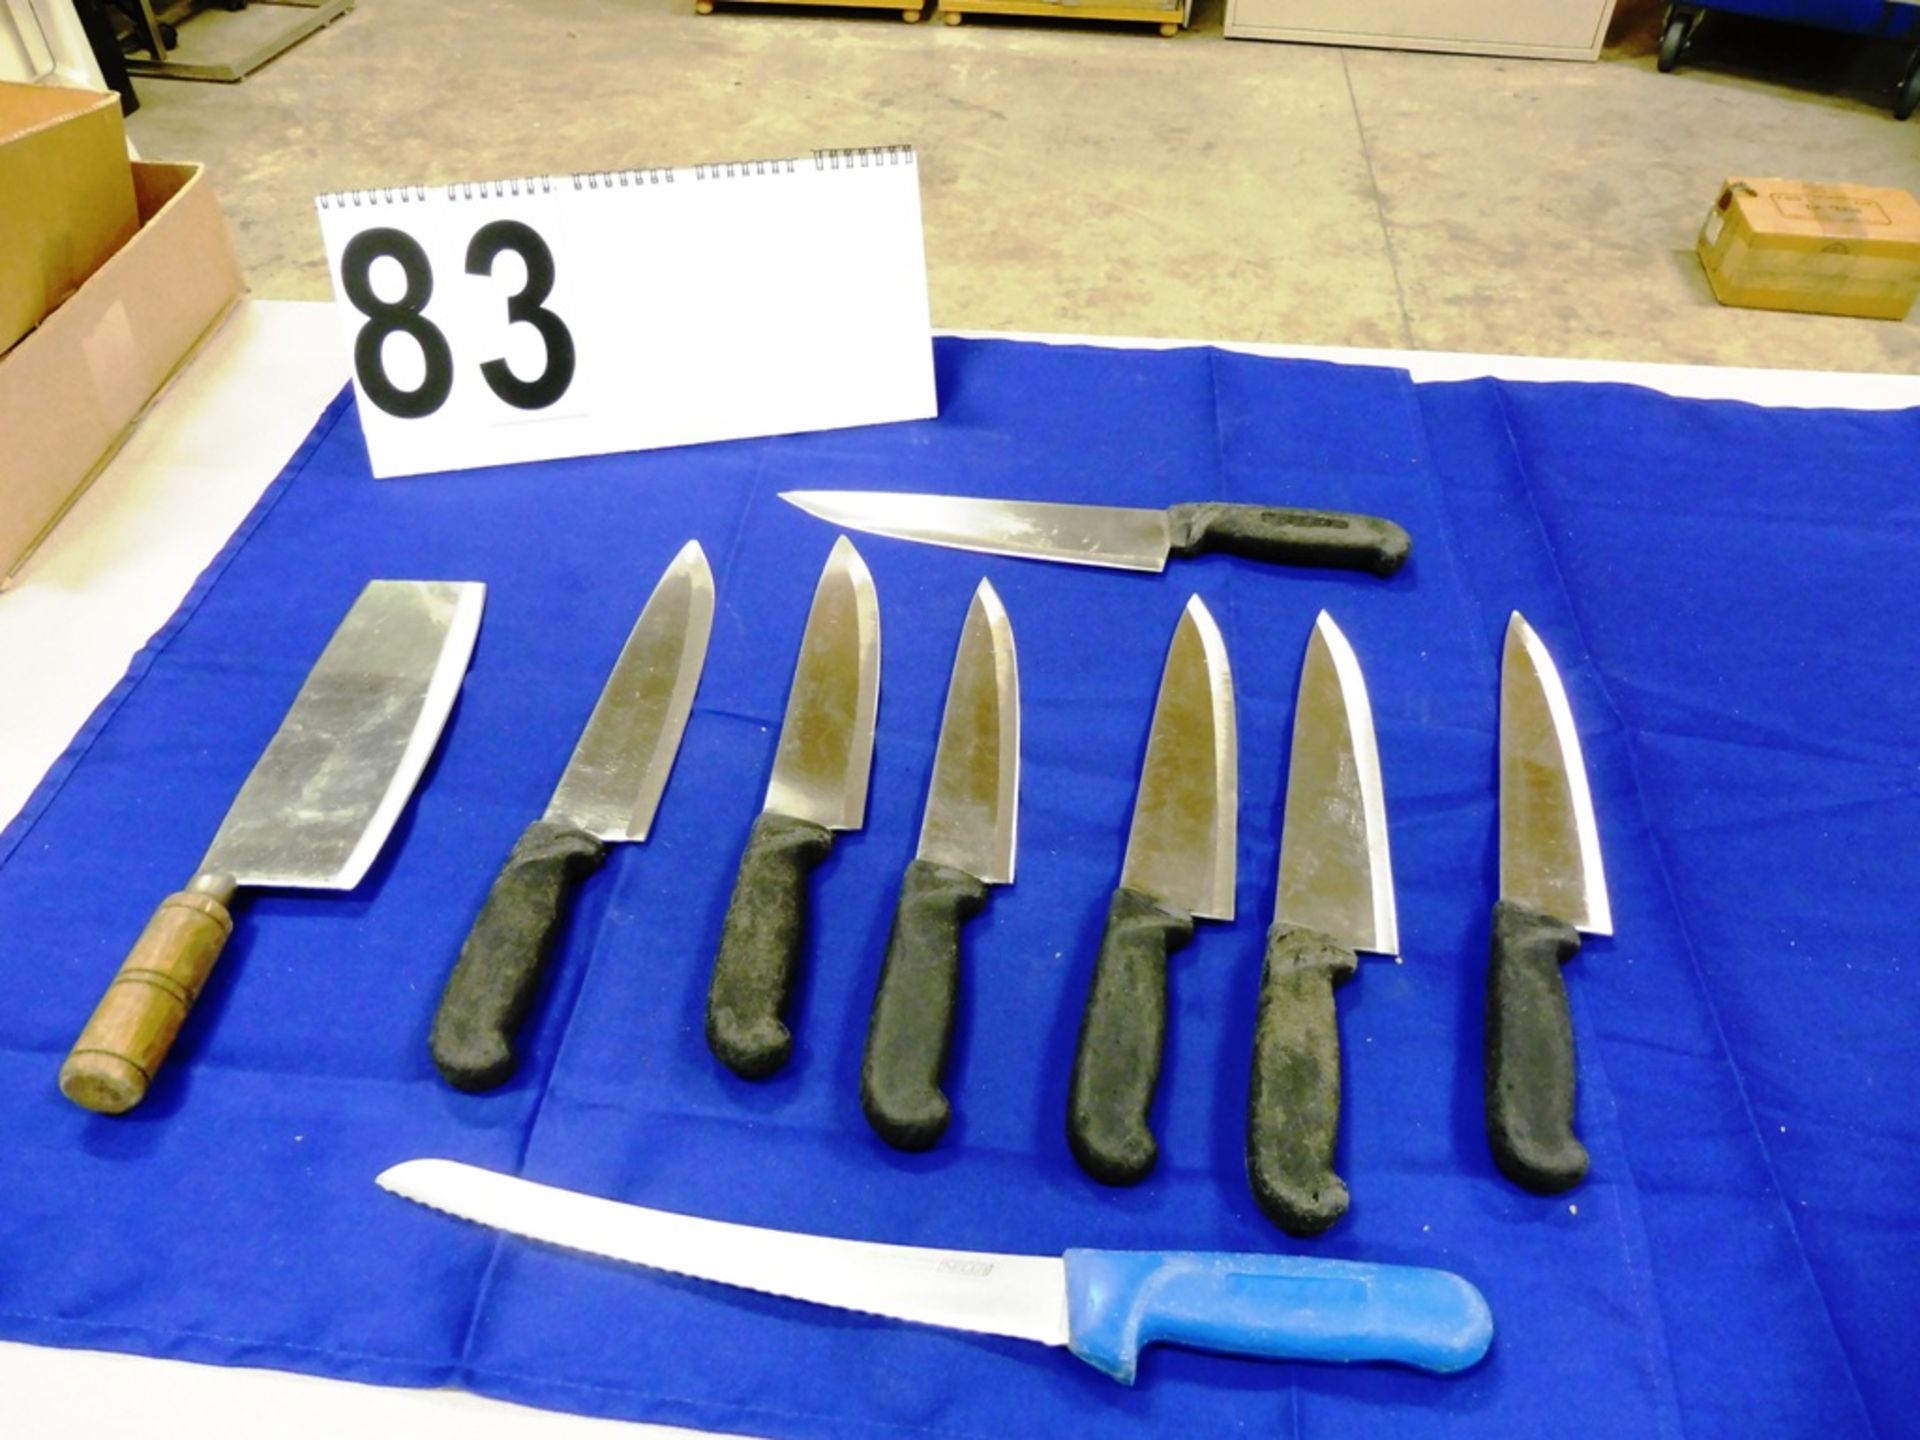 L/O 7-KITCHEN KNIVES, 1-SERRATED KNIFE, 1-MEAT CLEAVER